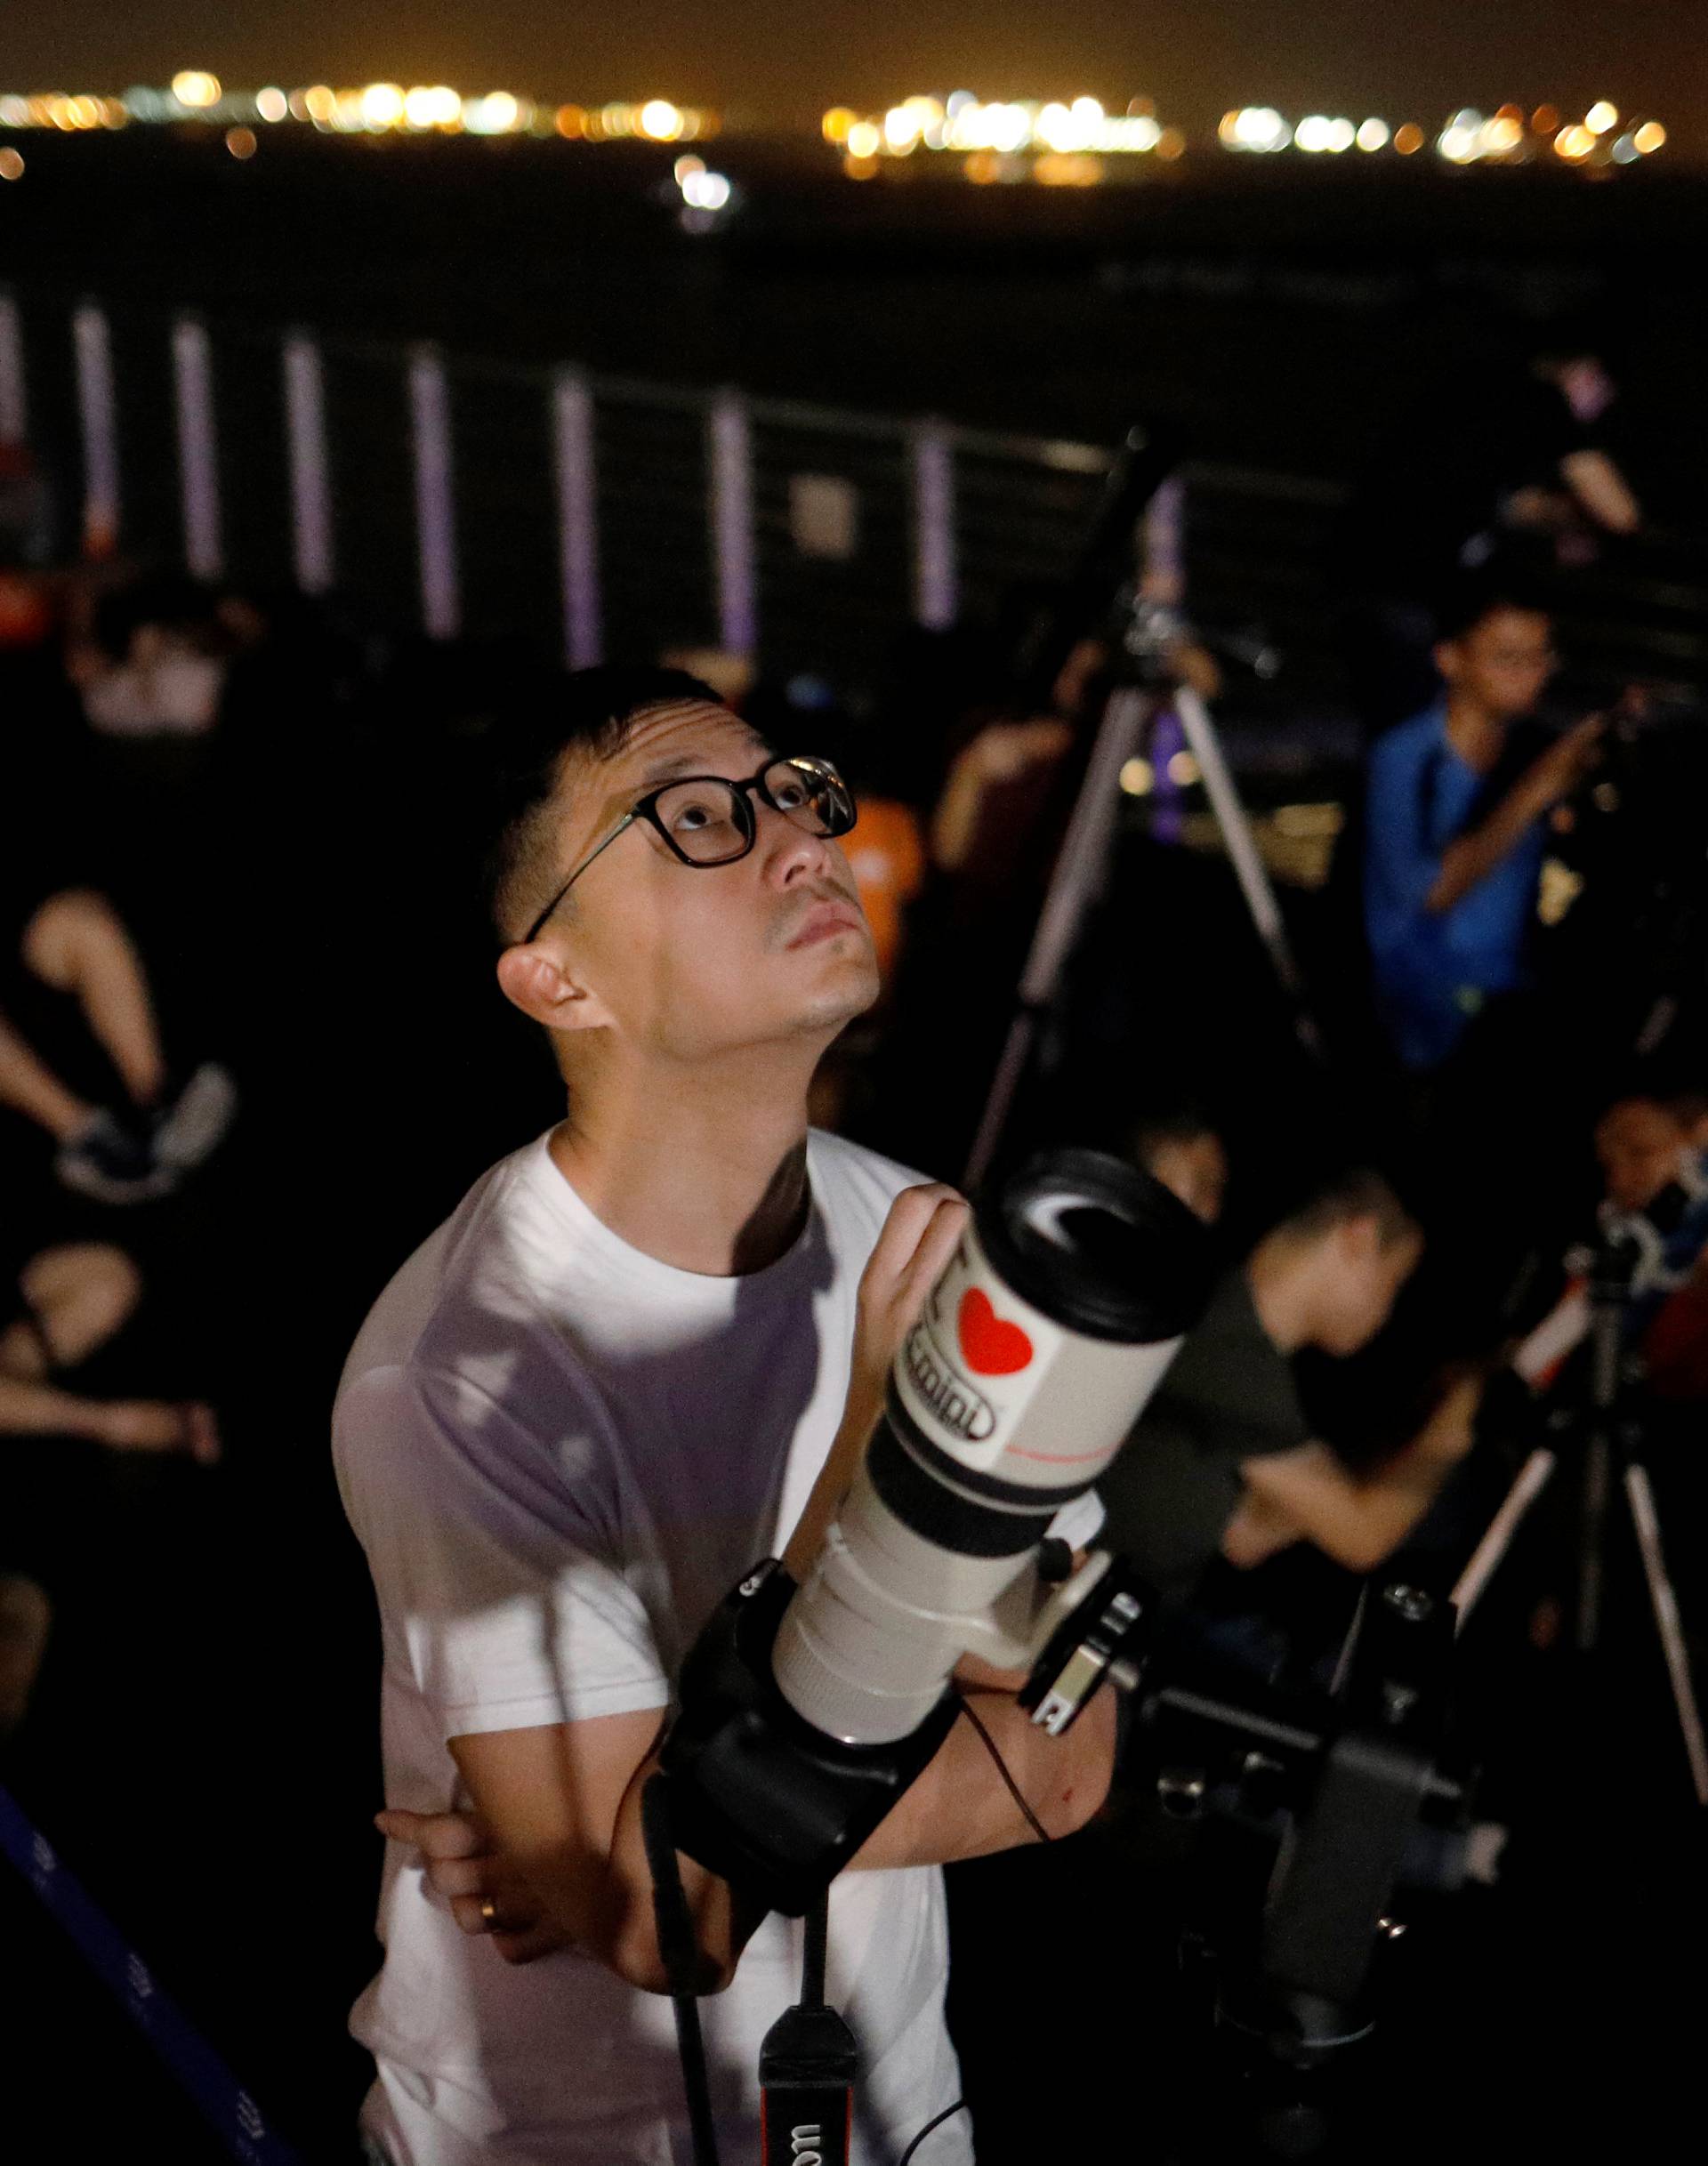 Astronomy enthusiasts wait to see the lunar eclipse of a blood moon at Marina South Pier in Singapore